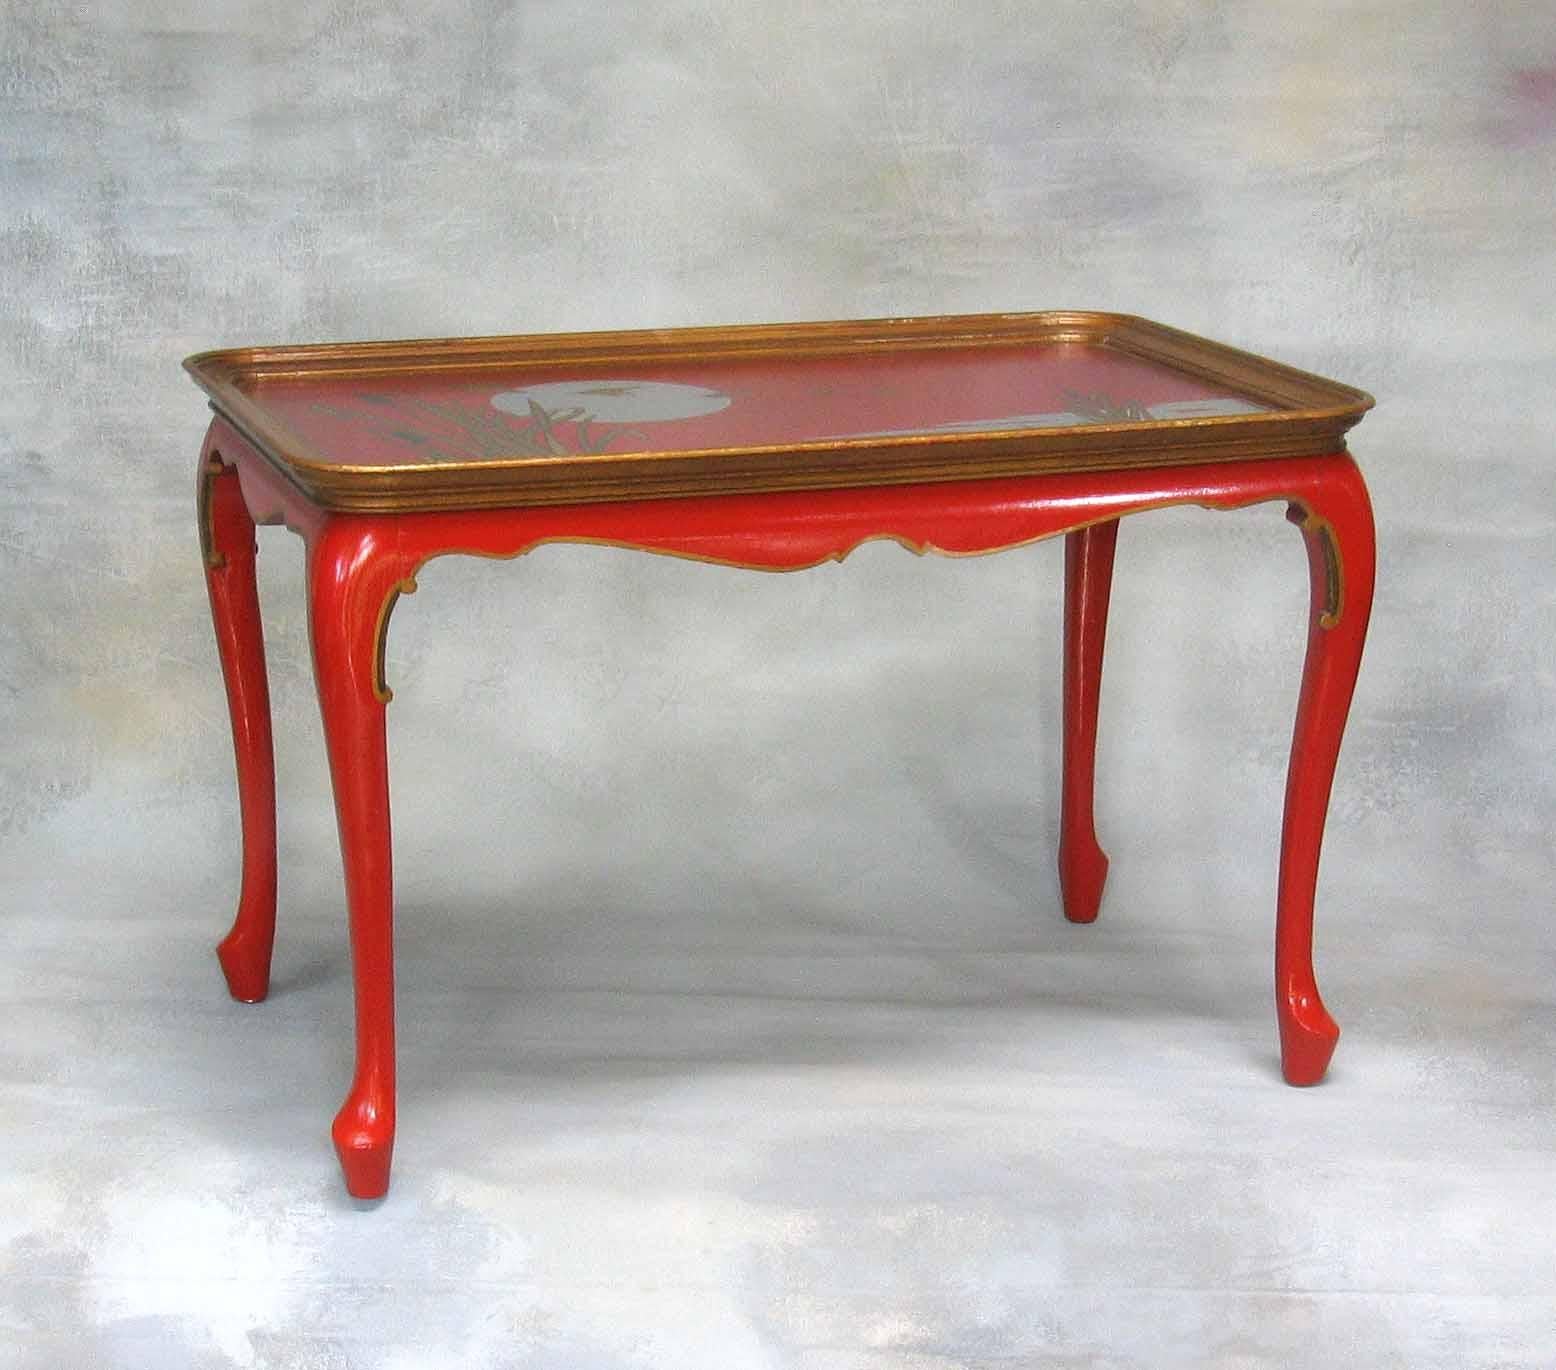 Elegant and Striking Japanned Tray or Cocktail Table French, Mid-20th Century For Sale 1